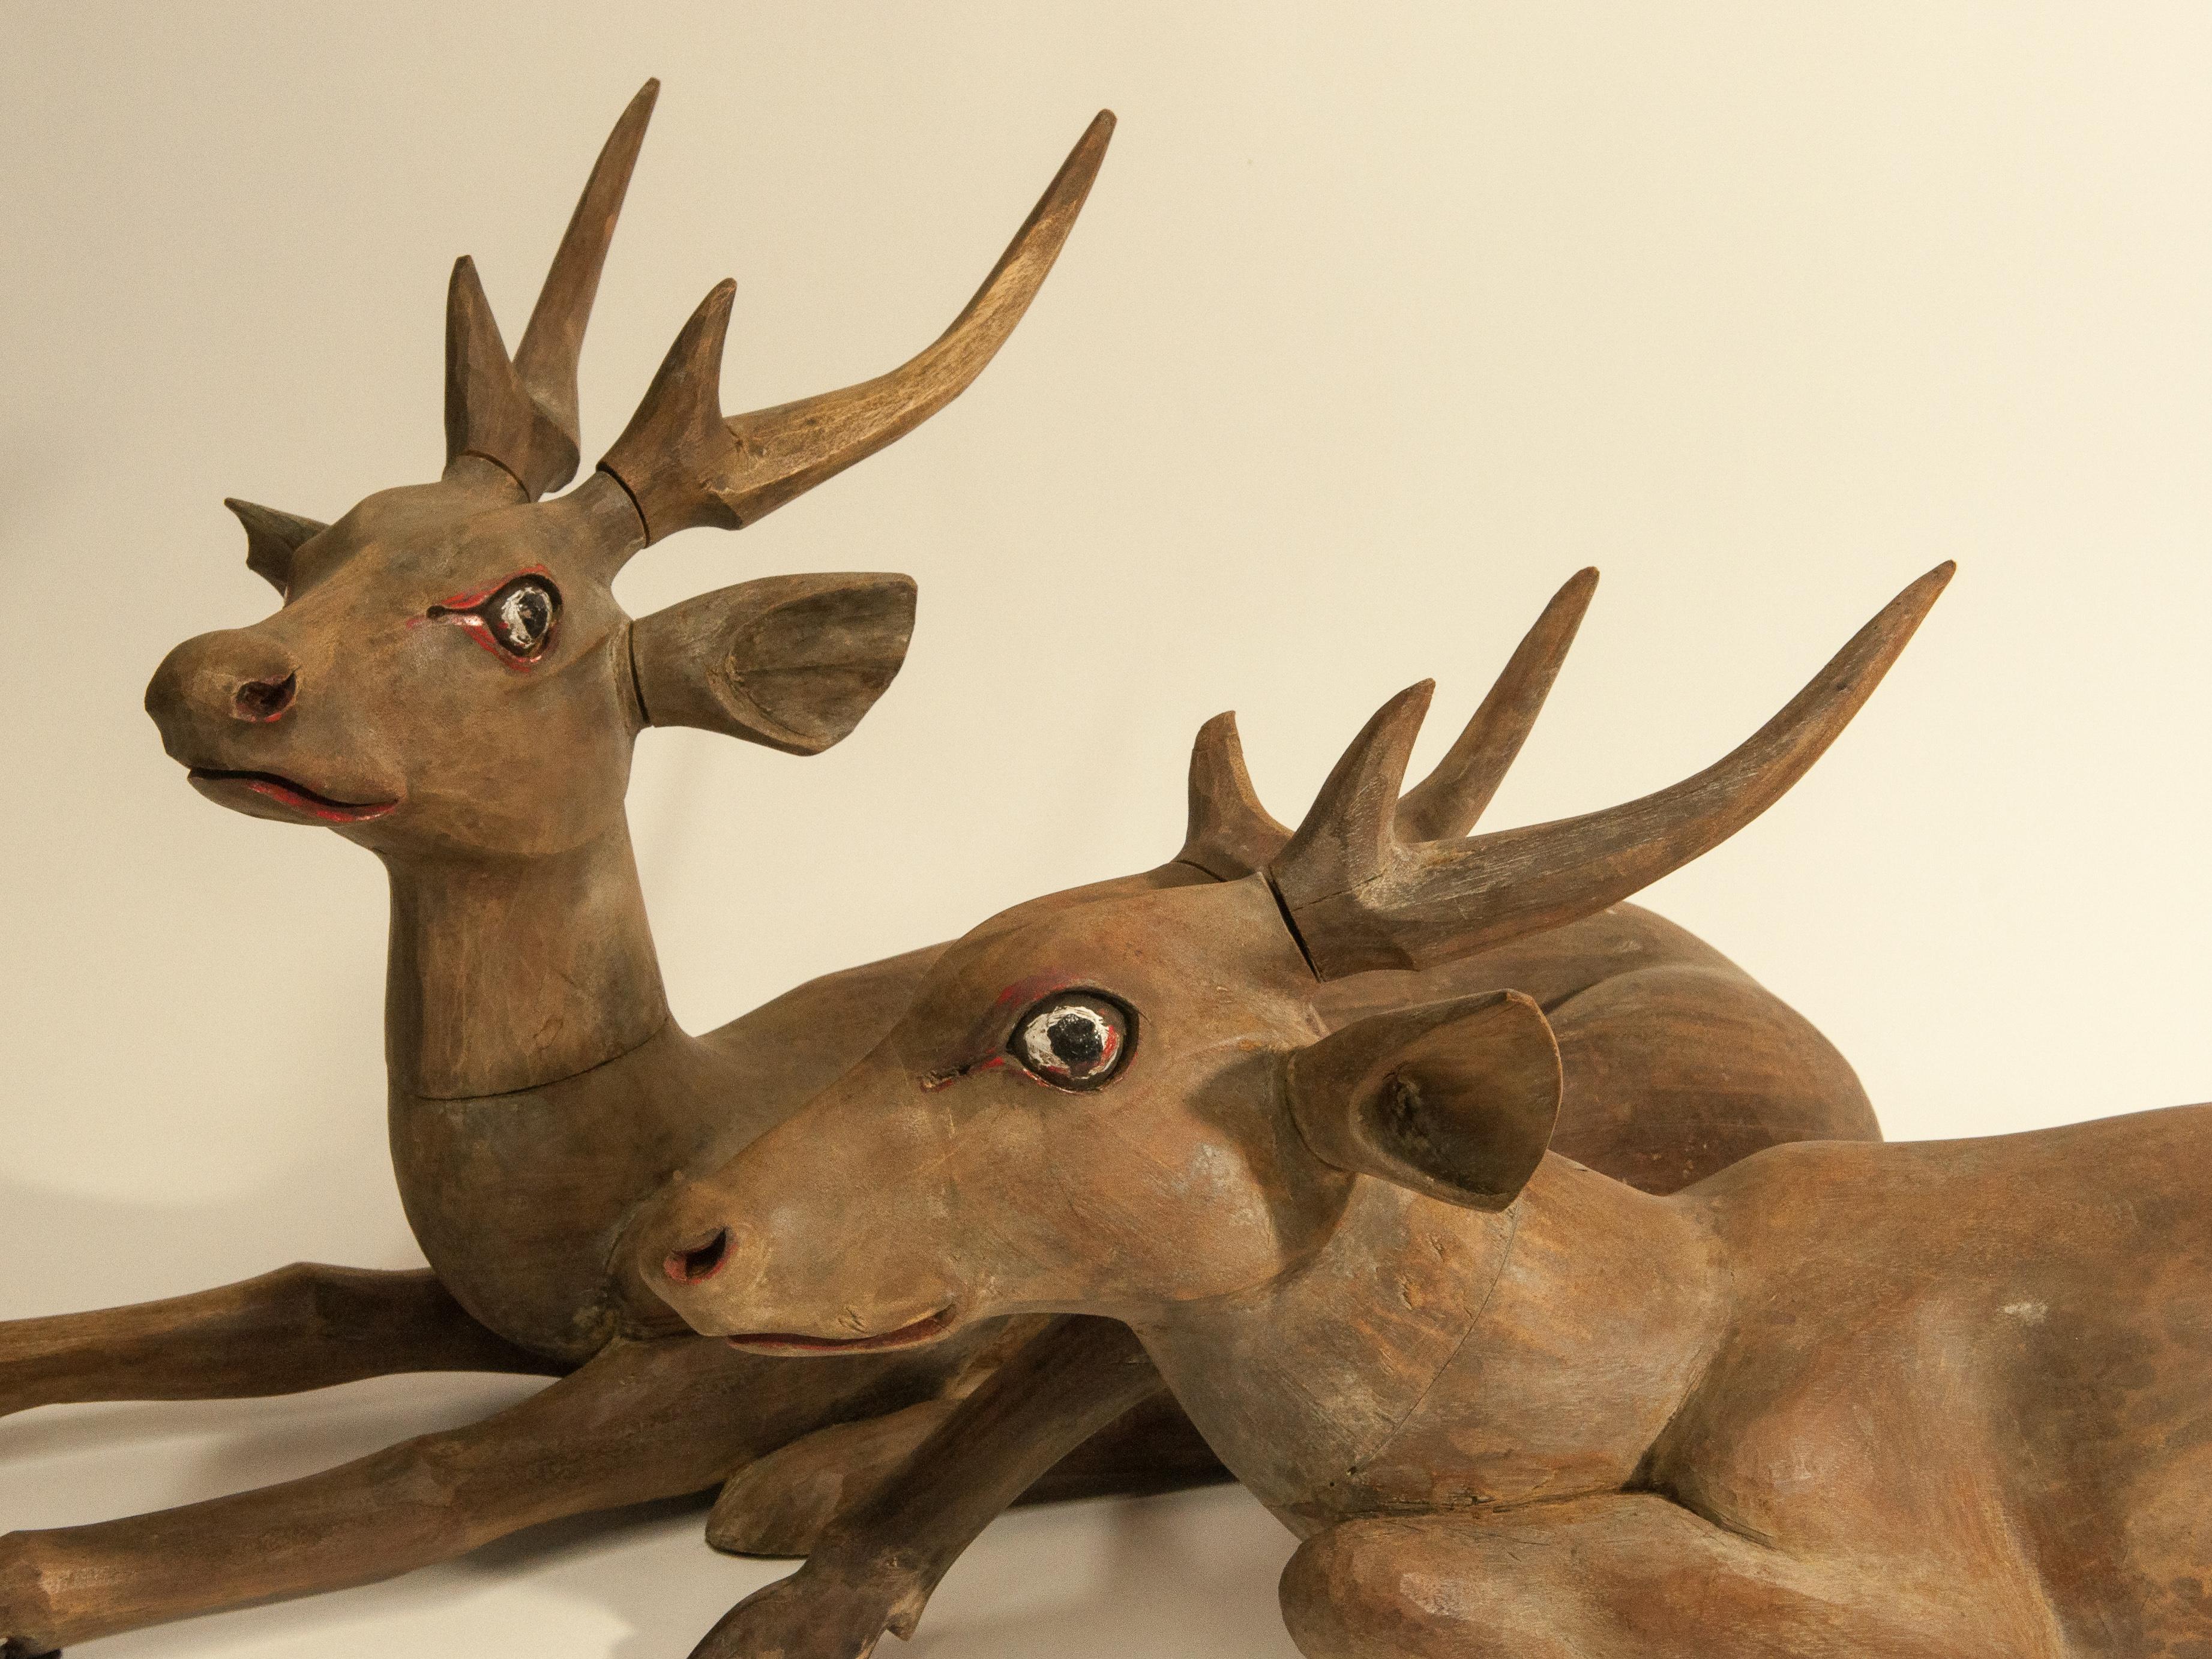 Hand carved deer. Pair of teak wood, Lombok Island, Indonesia, late 20th century.
Beautifully and expressively carved in a naturalistic style, with wooden antlers and some painted accents.
The pair is in very good condition.
Dimensions:
- 25